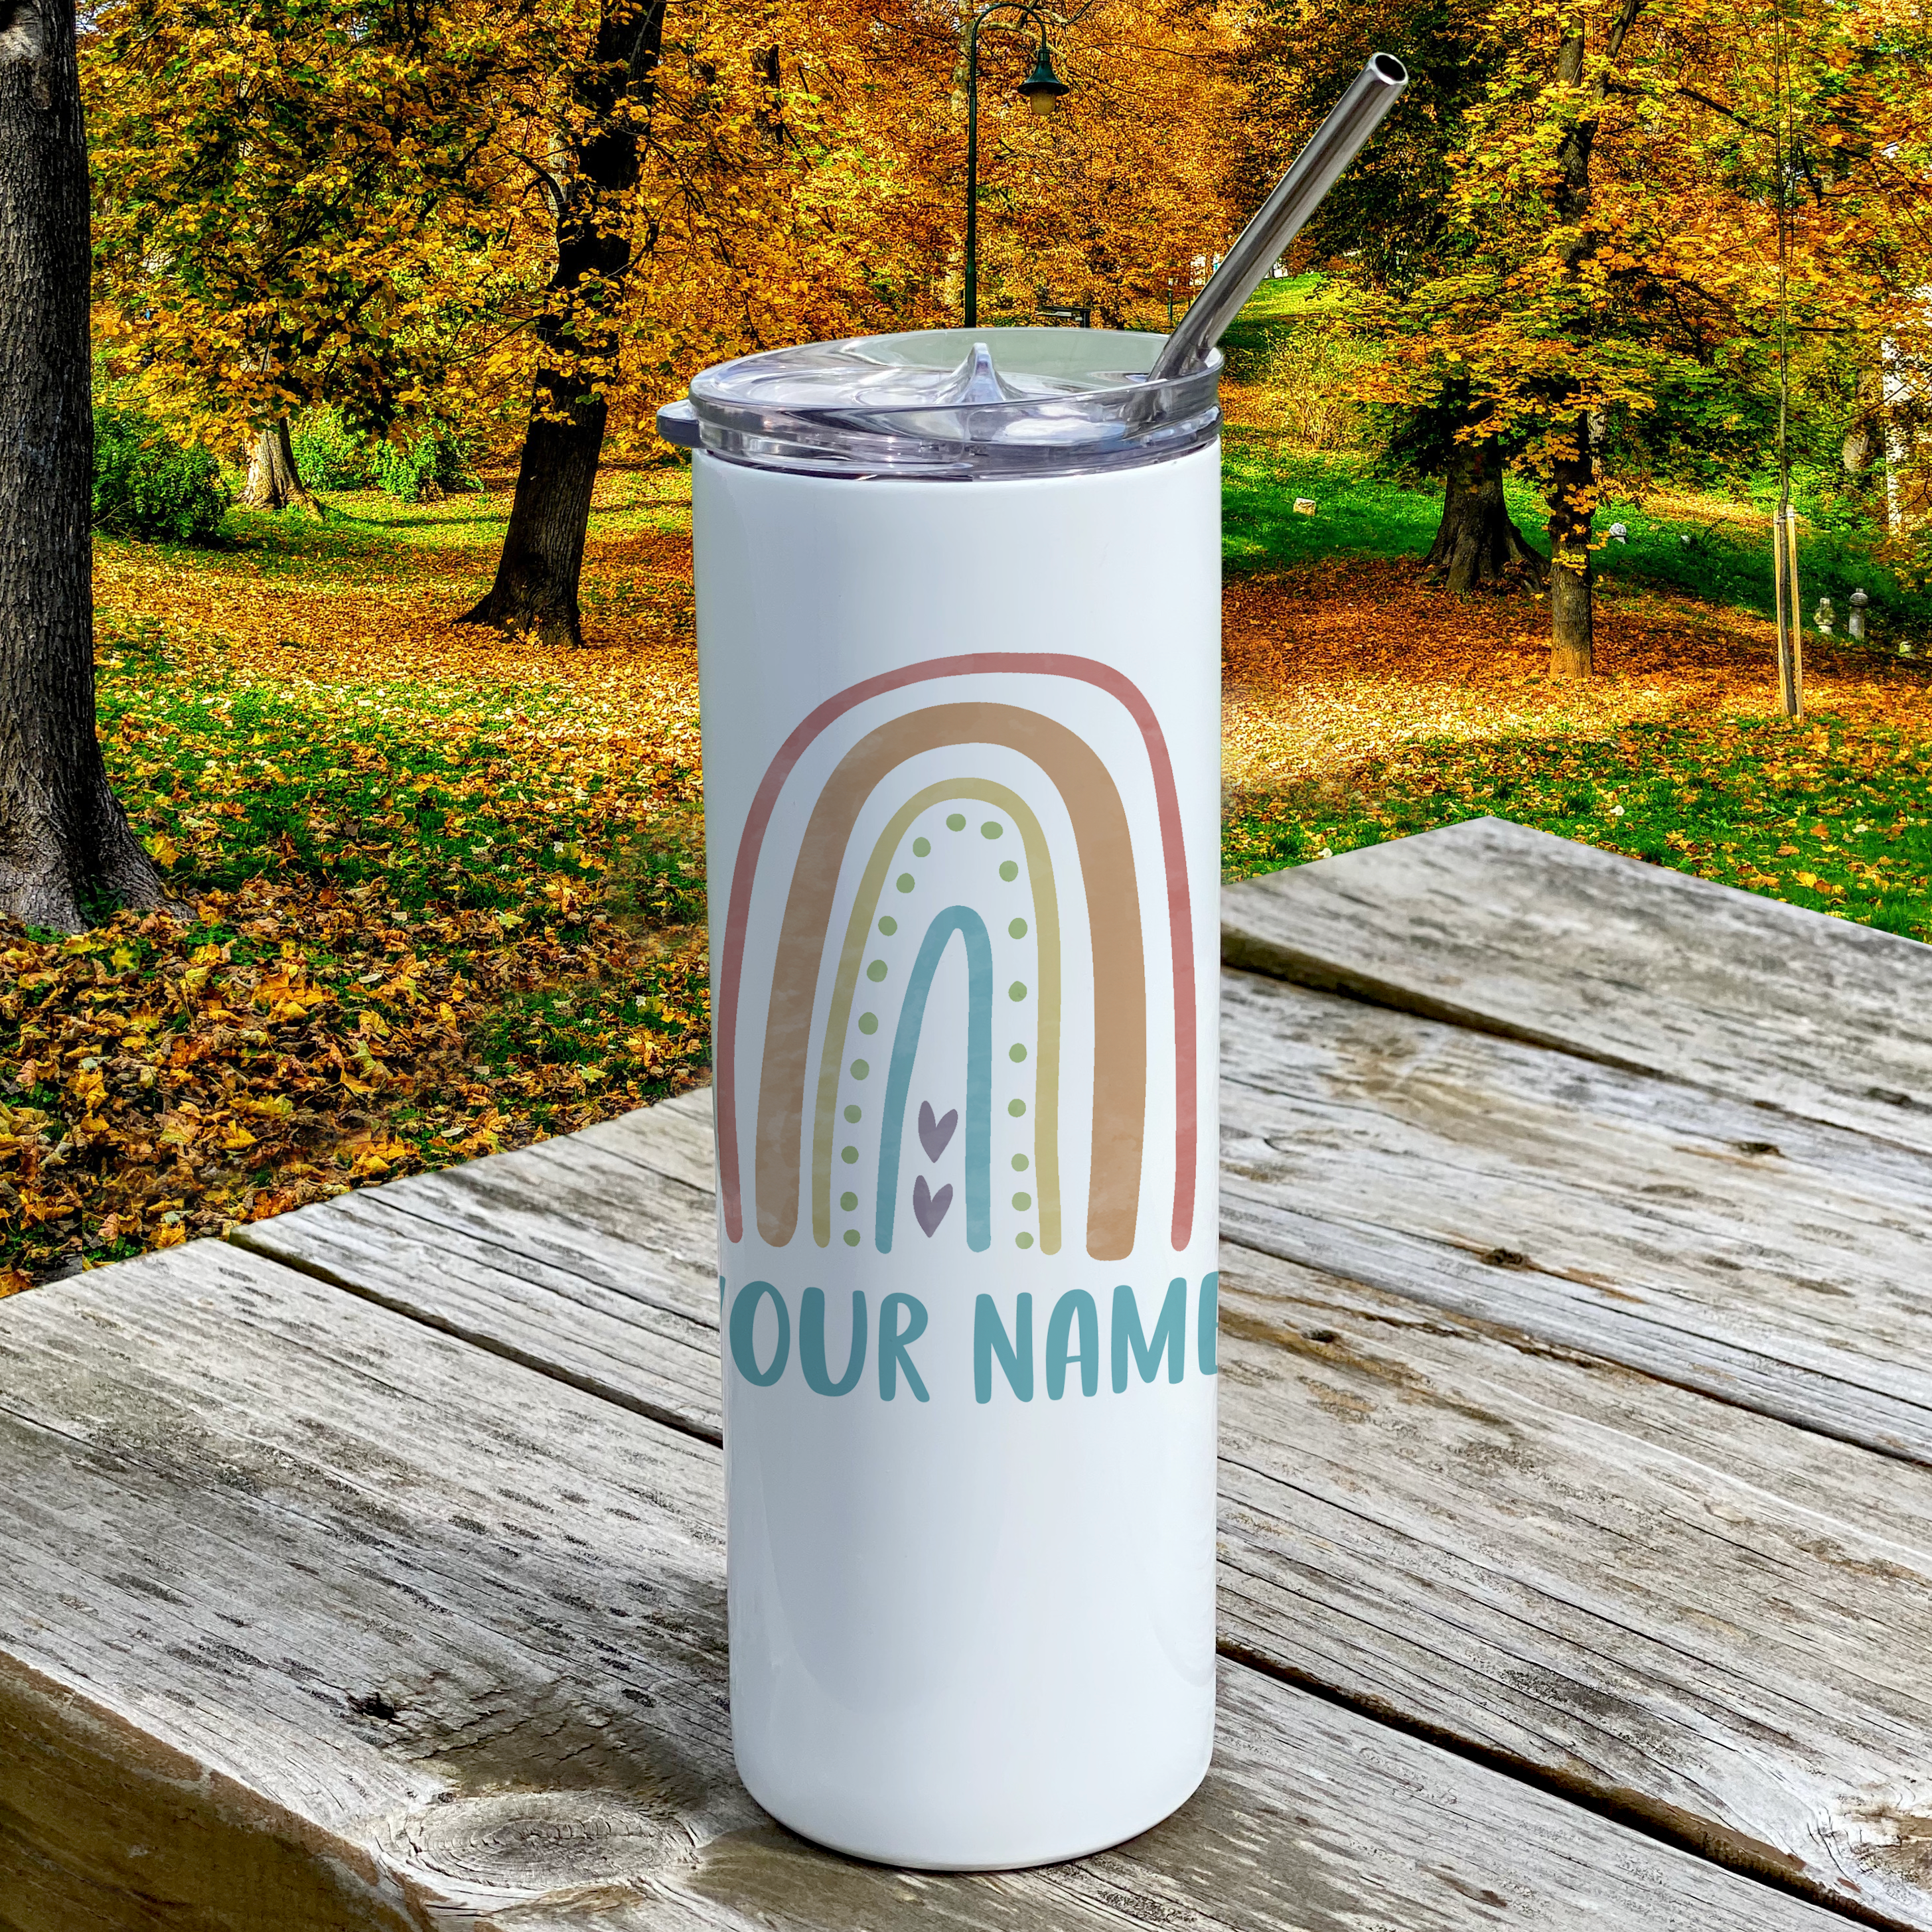 Trend Setters Original (Boho Rainbow - Personalized) 20 Oz Stainless Steel Travel Tumbler with Straw (White)